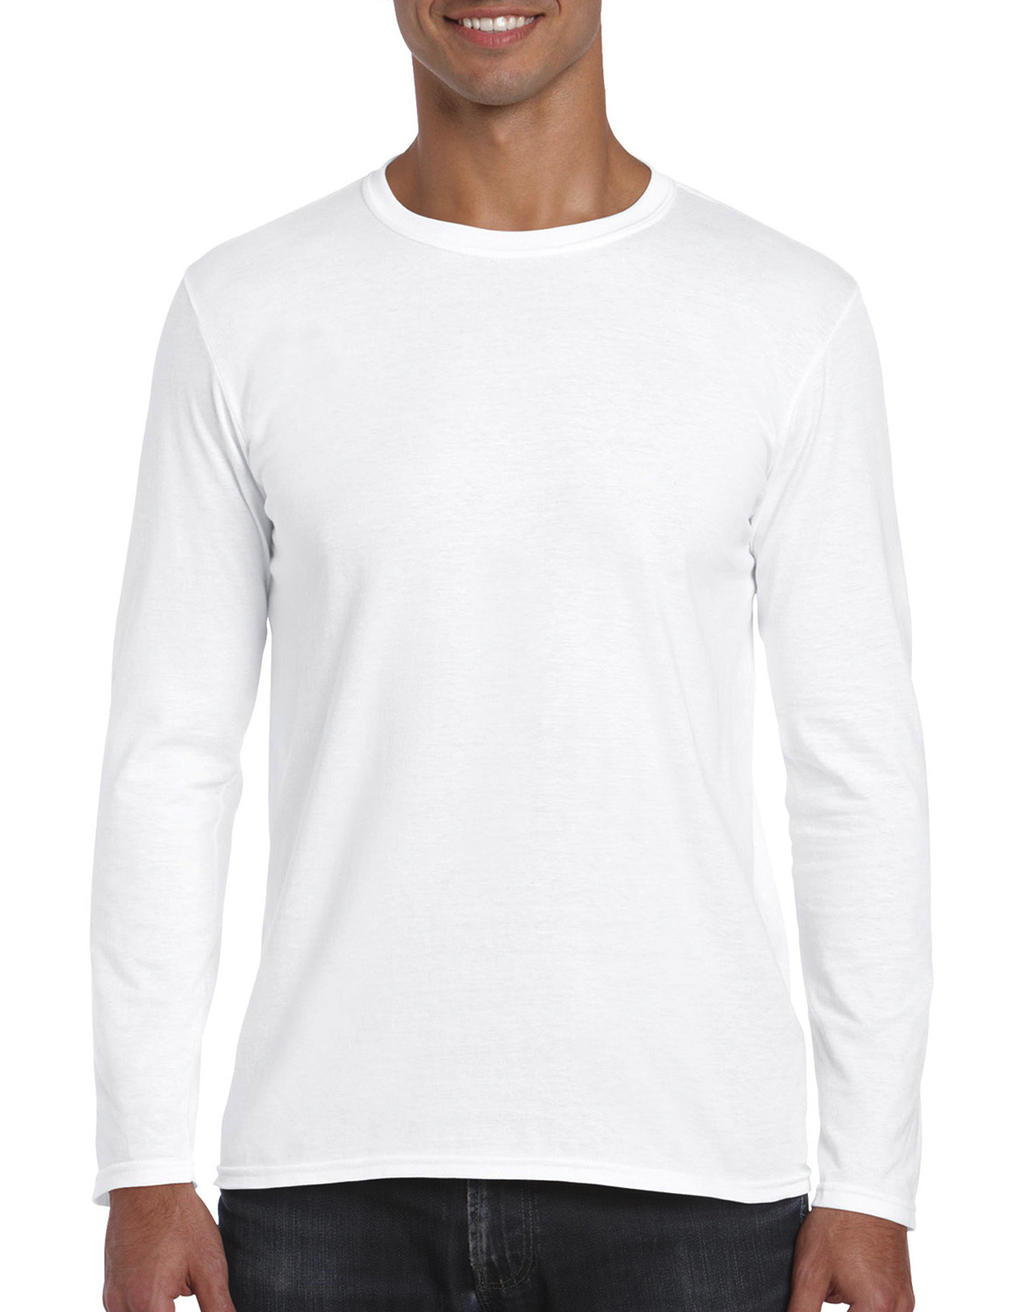 Softstyle Adult Long Sleeve T-Shirt